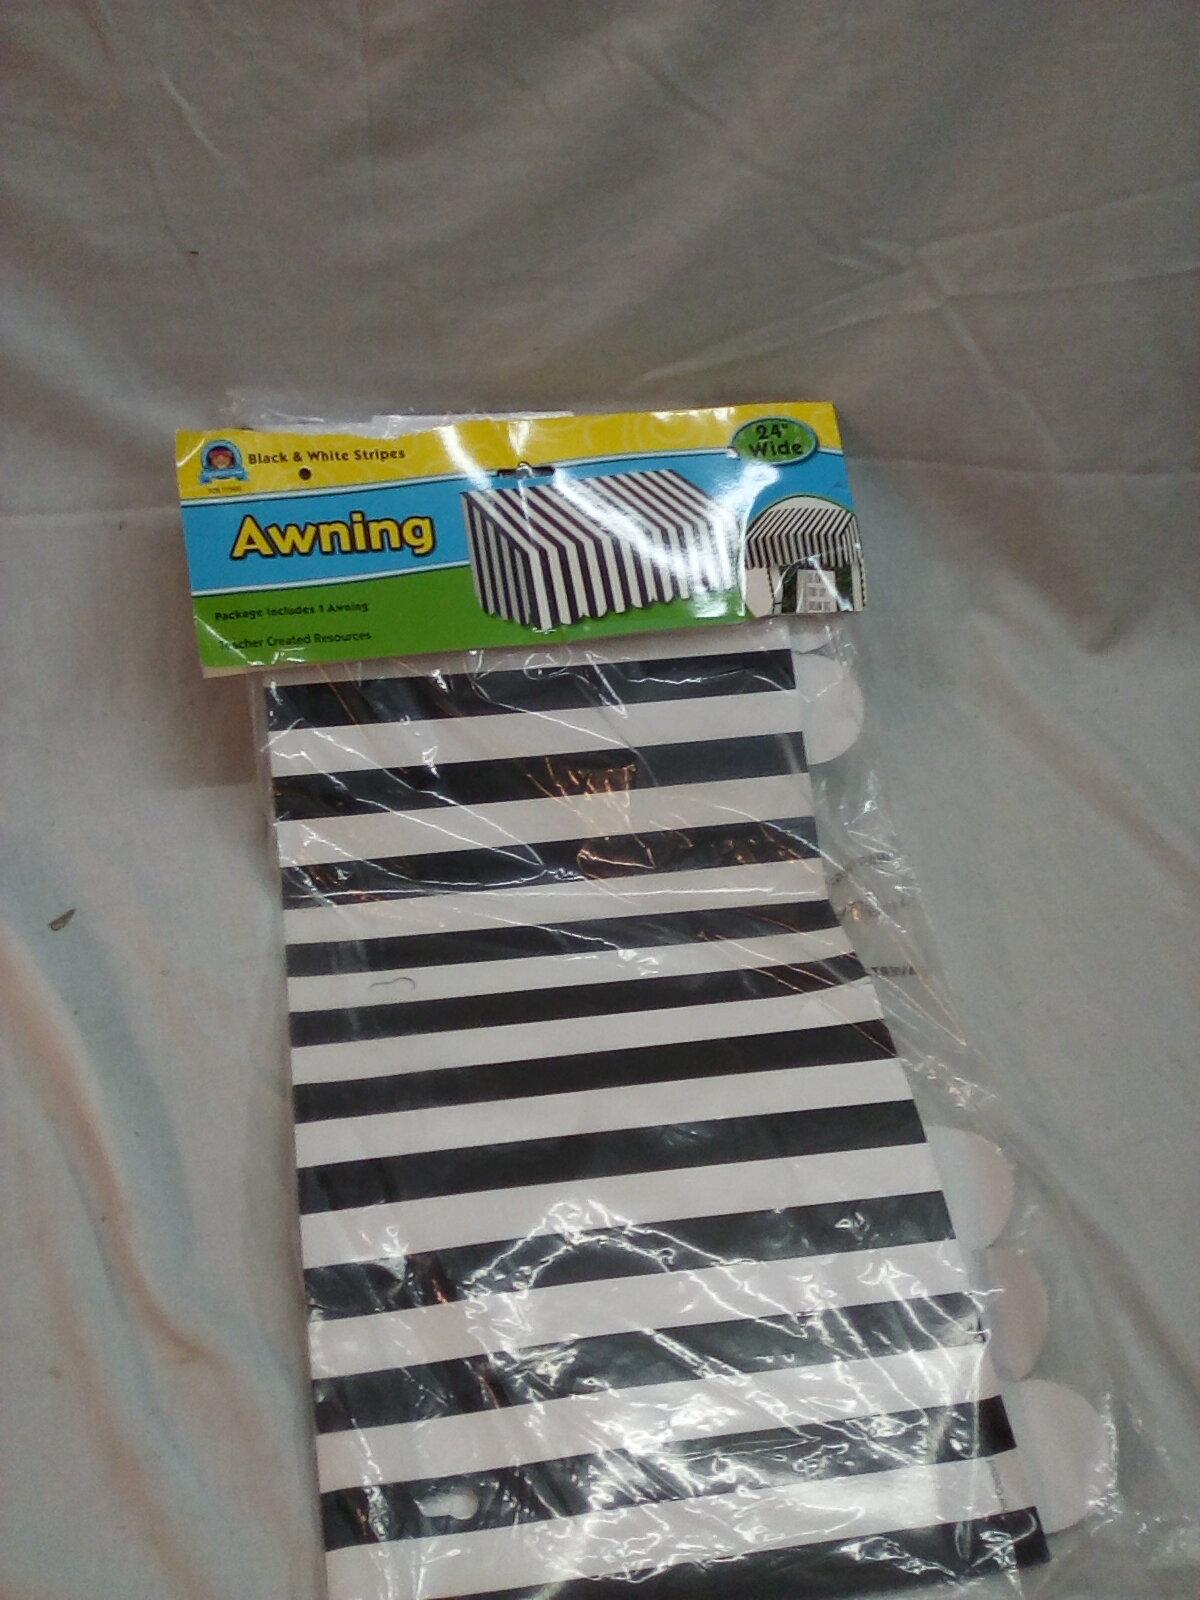 24” Black and White Striped Awning